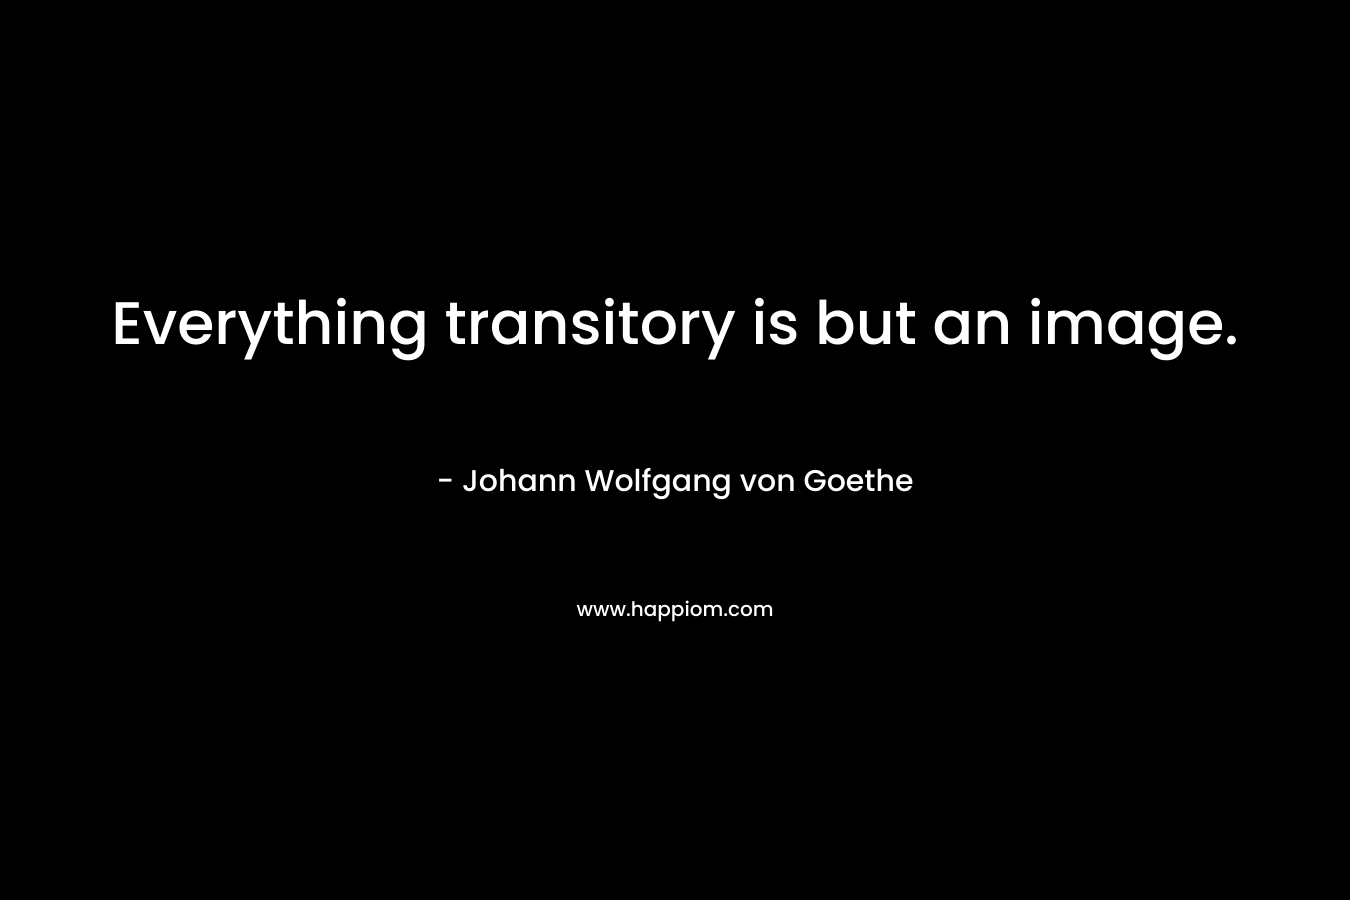 Everything transitory is but an image. – Johann Wolfgang von Goethe